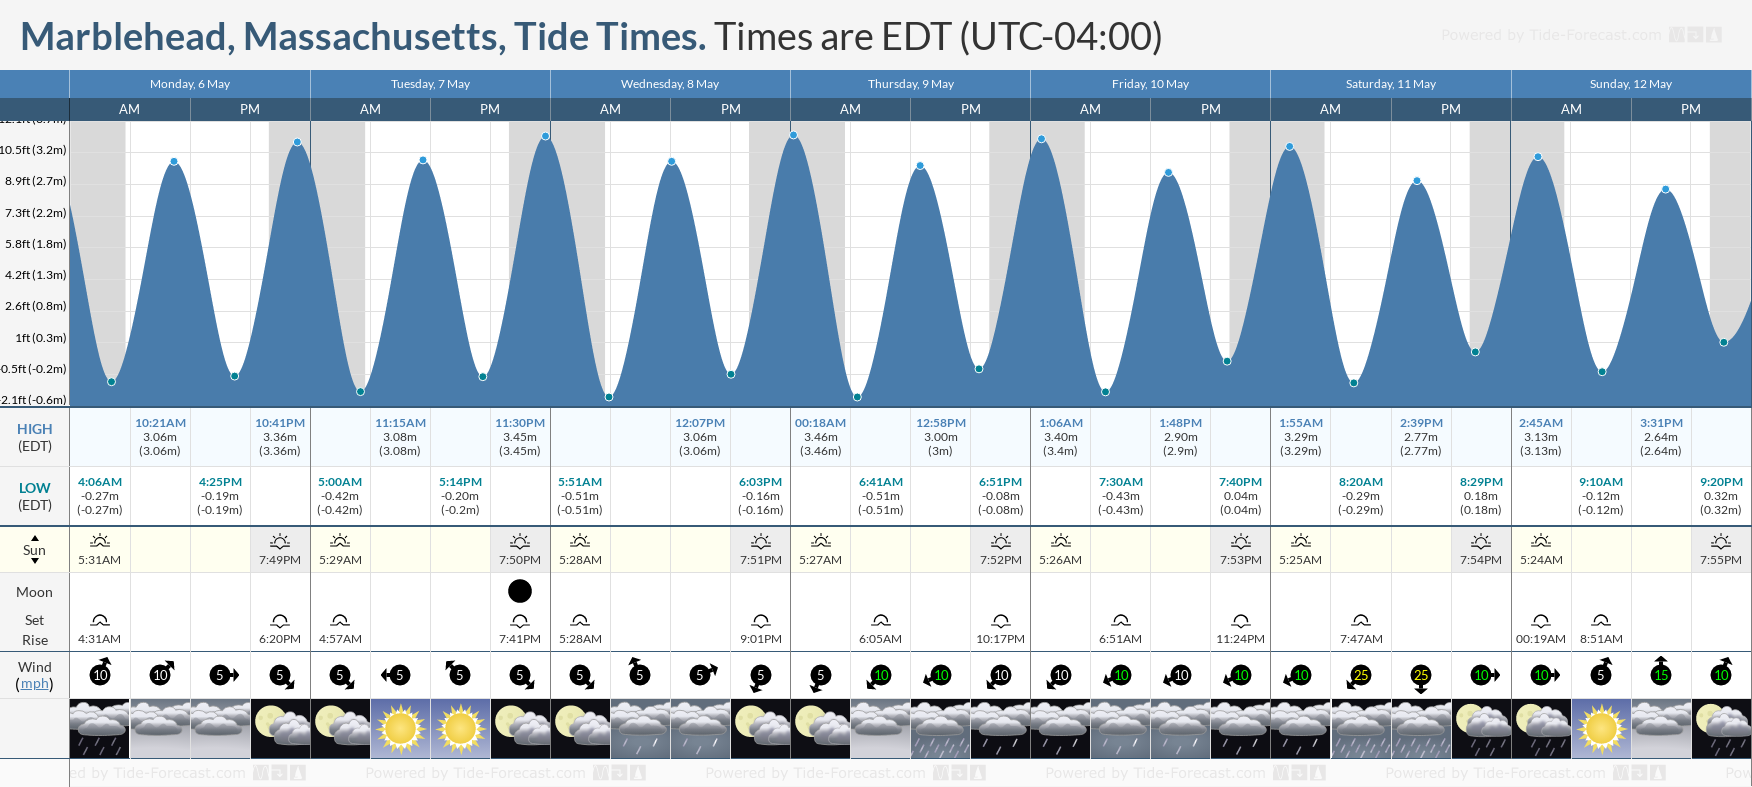 Marblehead, Massachusetts Tide Chart including high and low tide tide times for the next 7 days